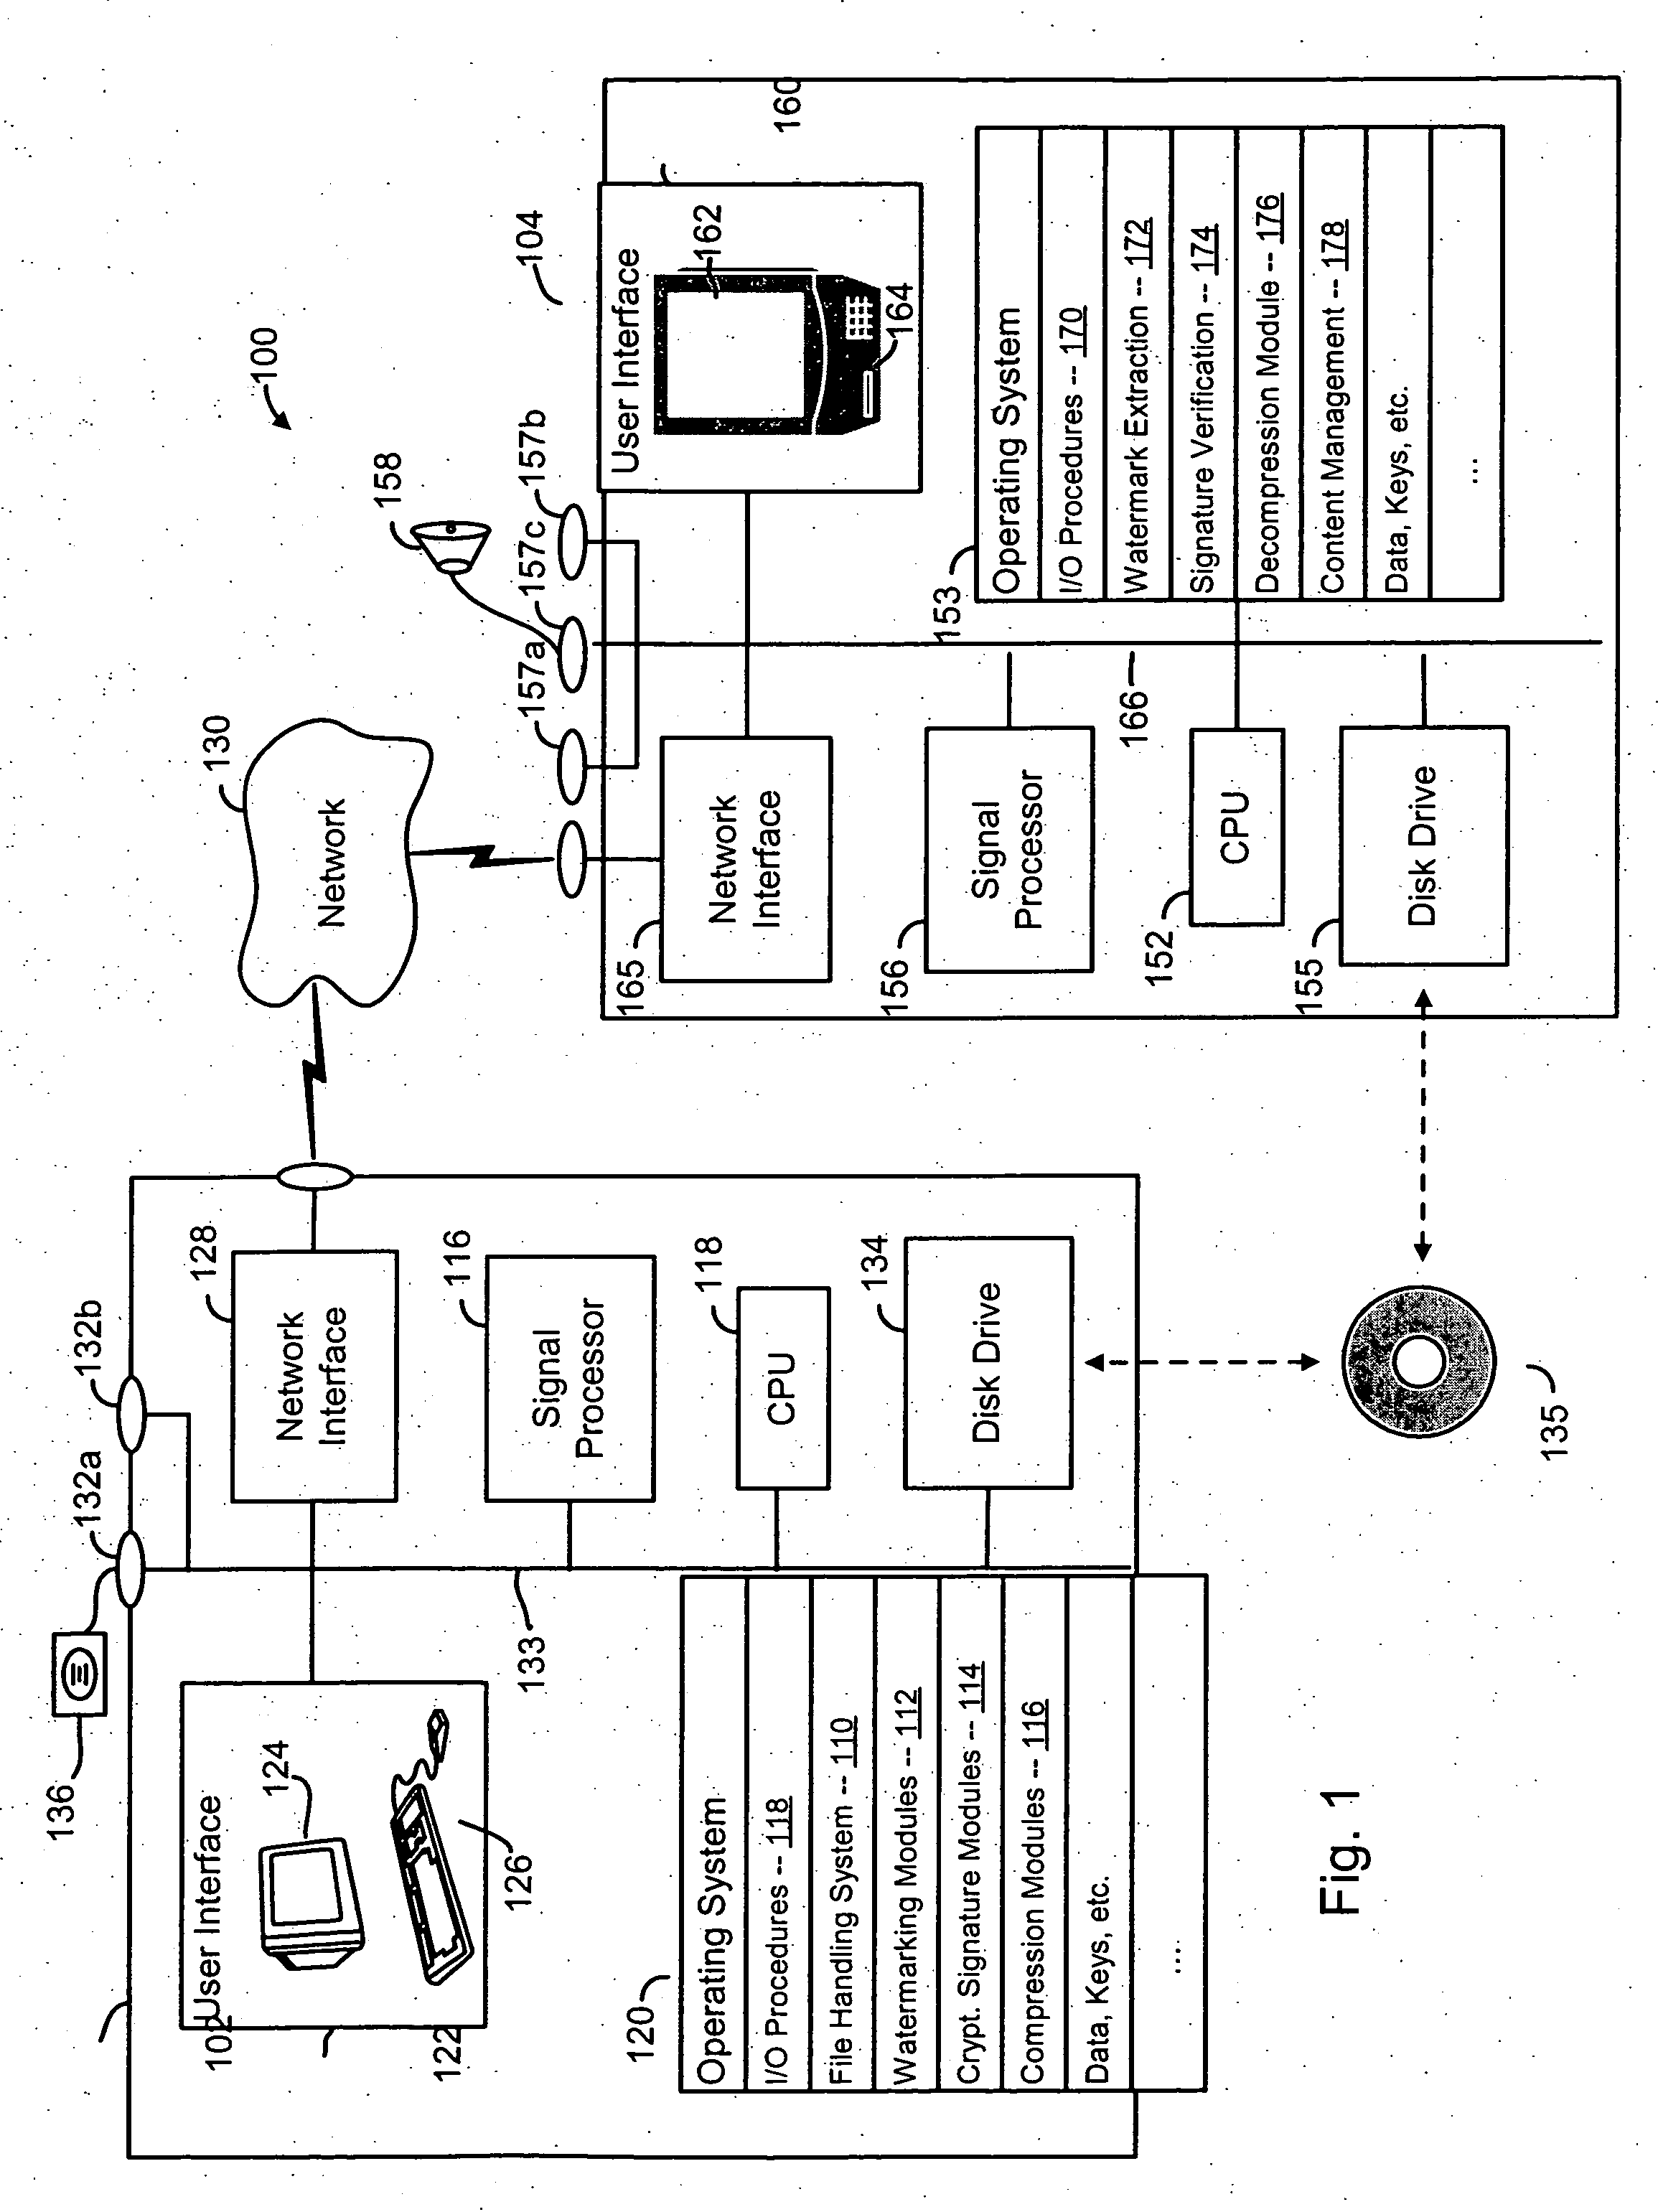 Methods and systems for encoding and protecting data using digial signature and watermarking techniques